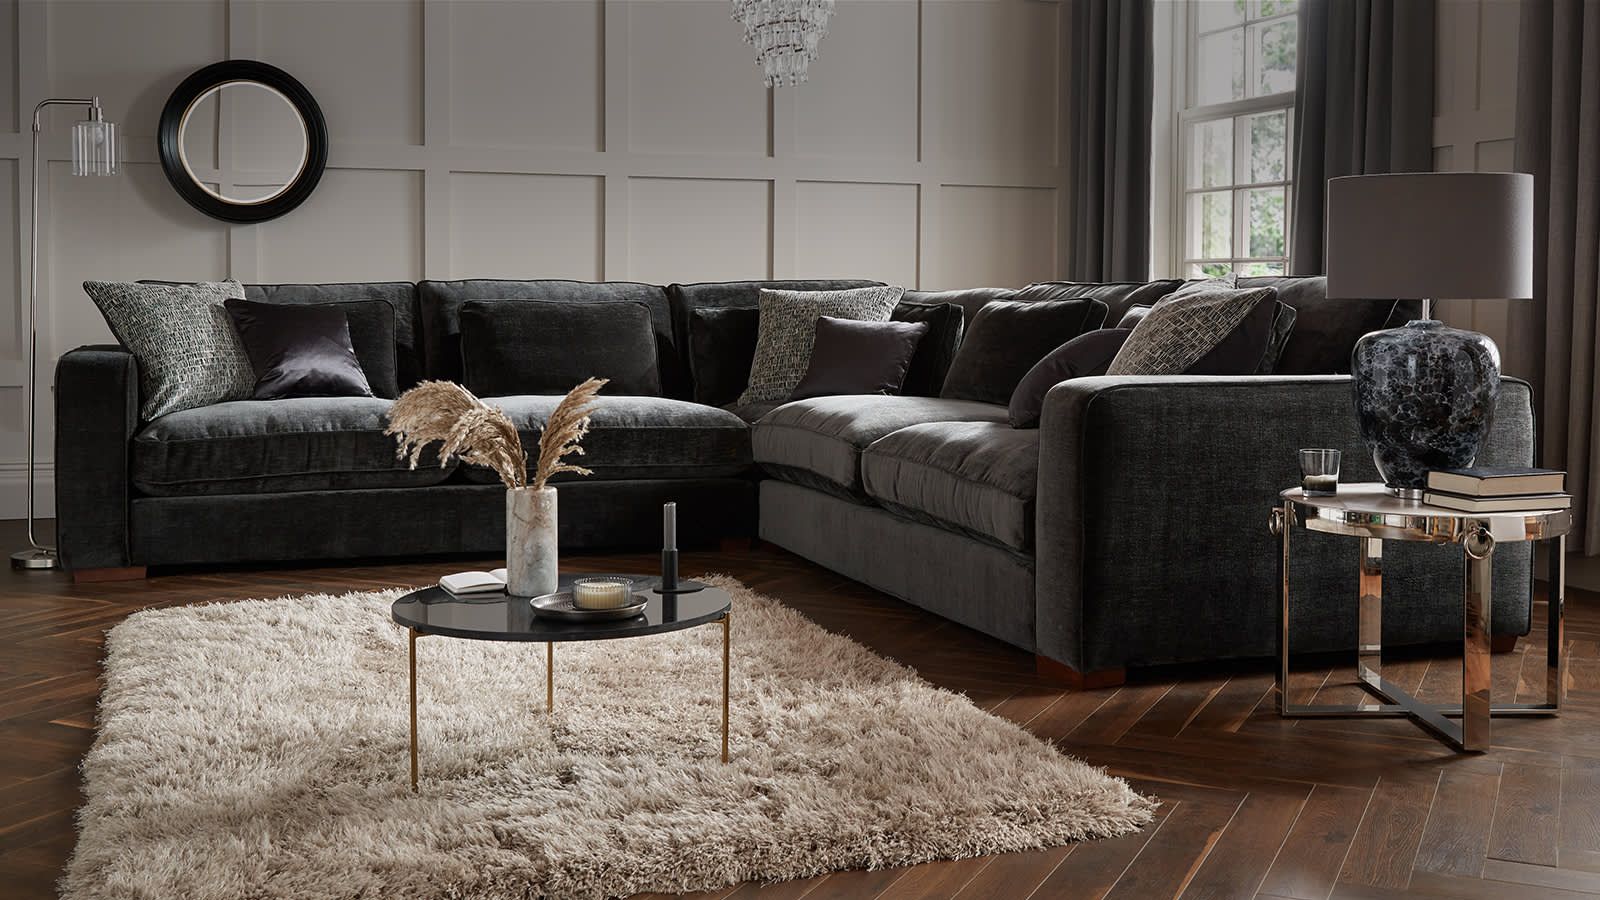 A Buying Guide For Corner Sofas | Sofology Pertaining To Microfiber Sectional Corner Sofas (View 10 of 15)